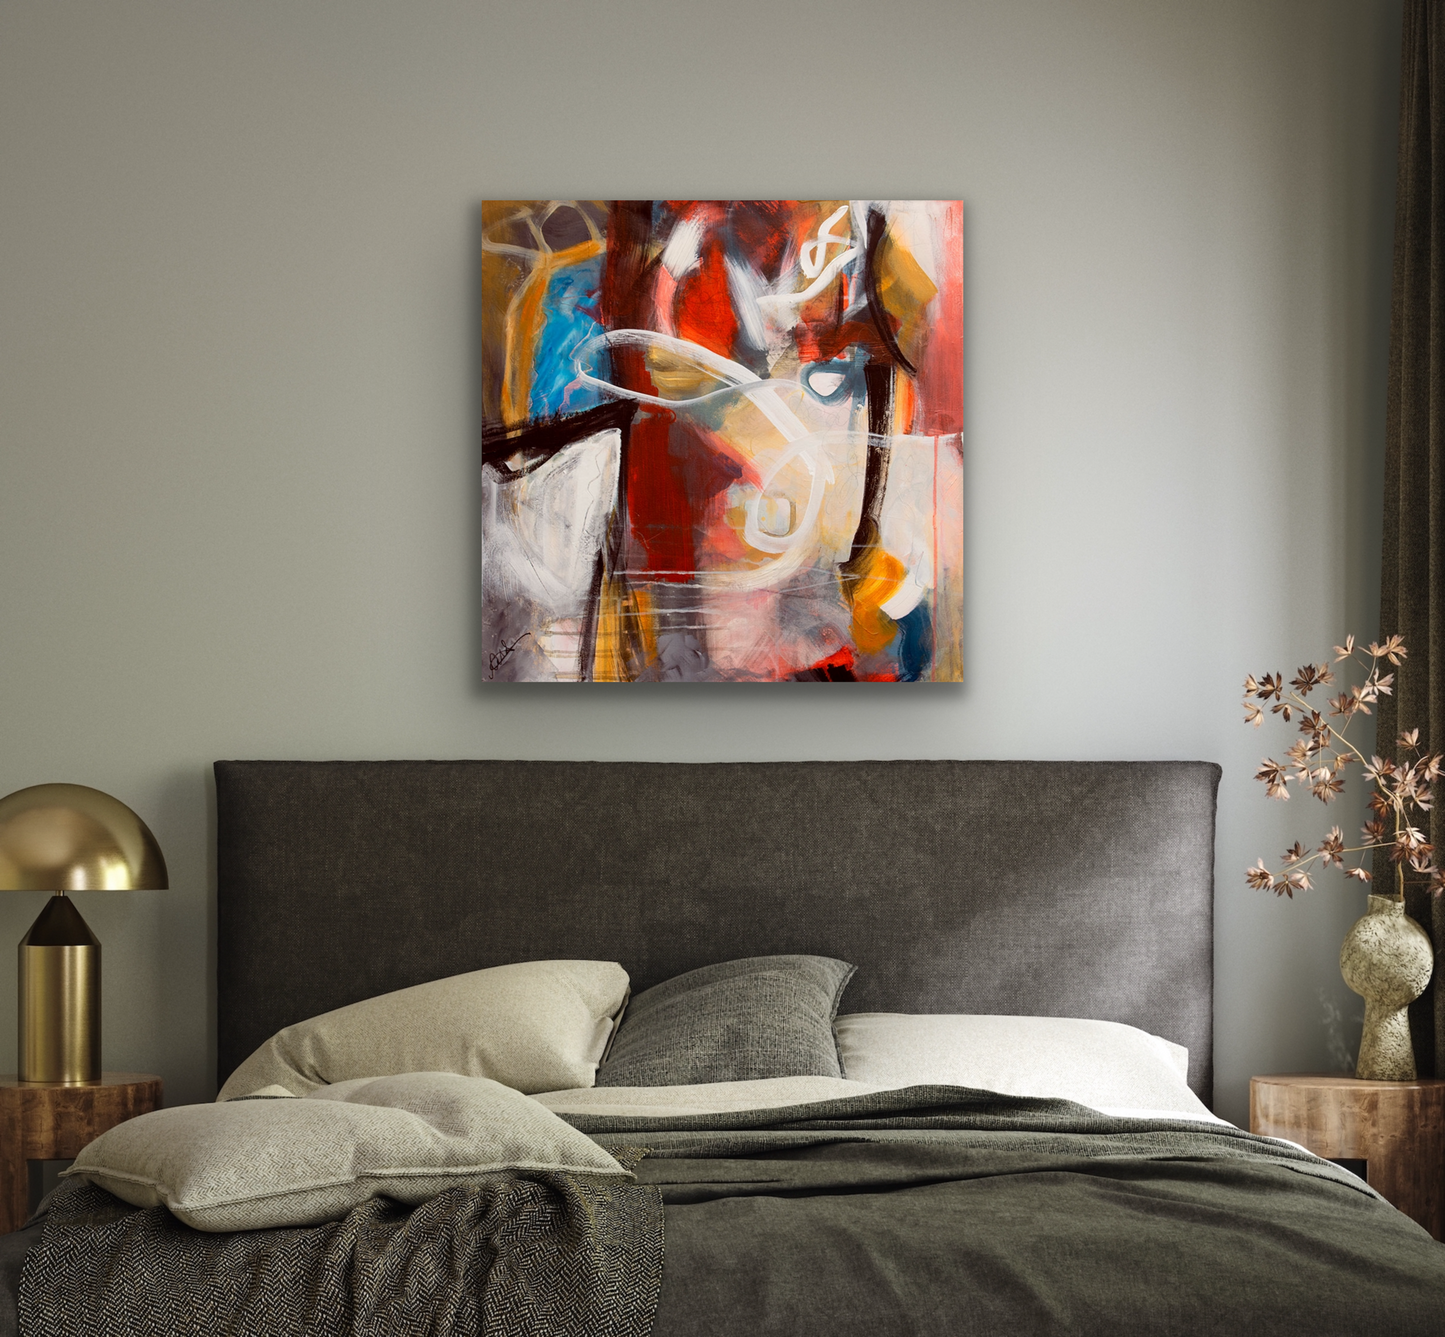 This work of art comes in five different canvas print sizes to fit your wall perfectly.